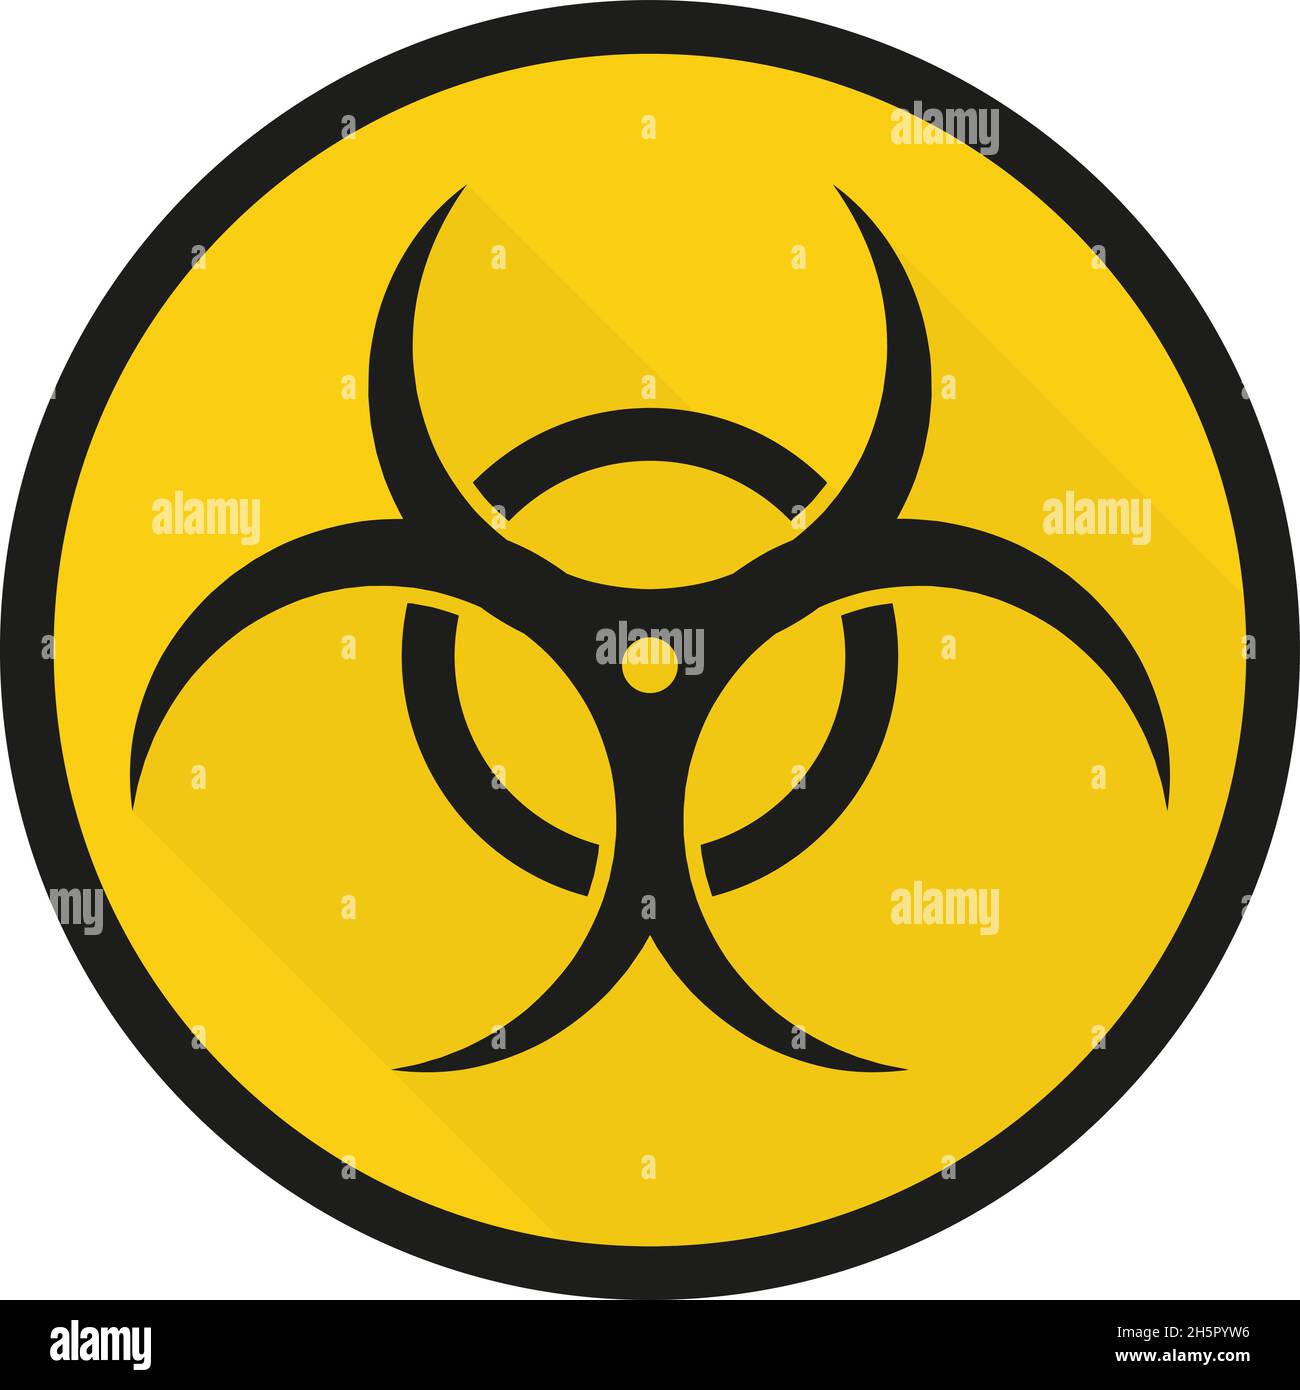 chemical weapons sign